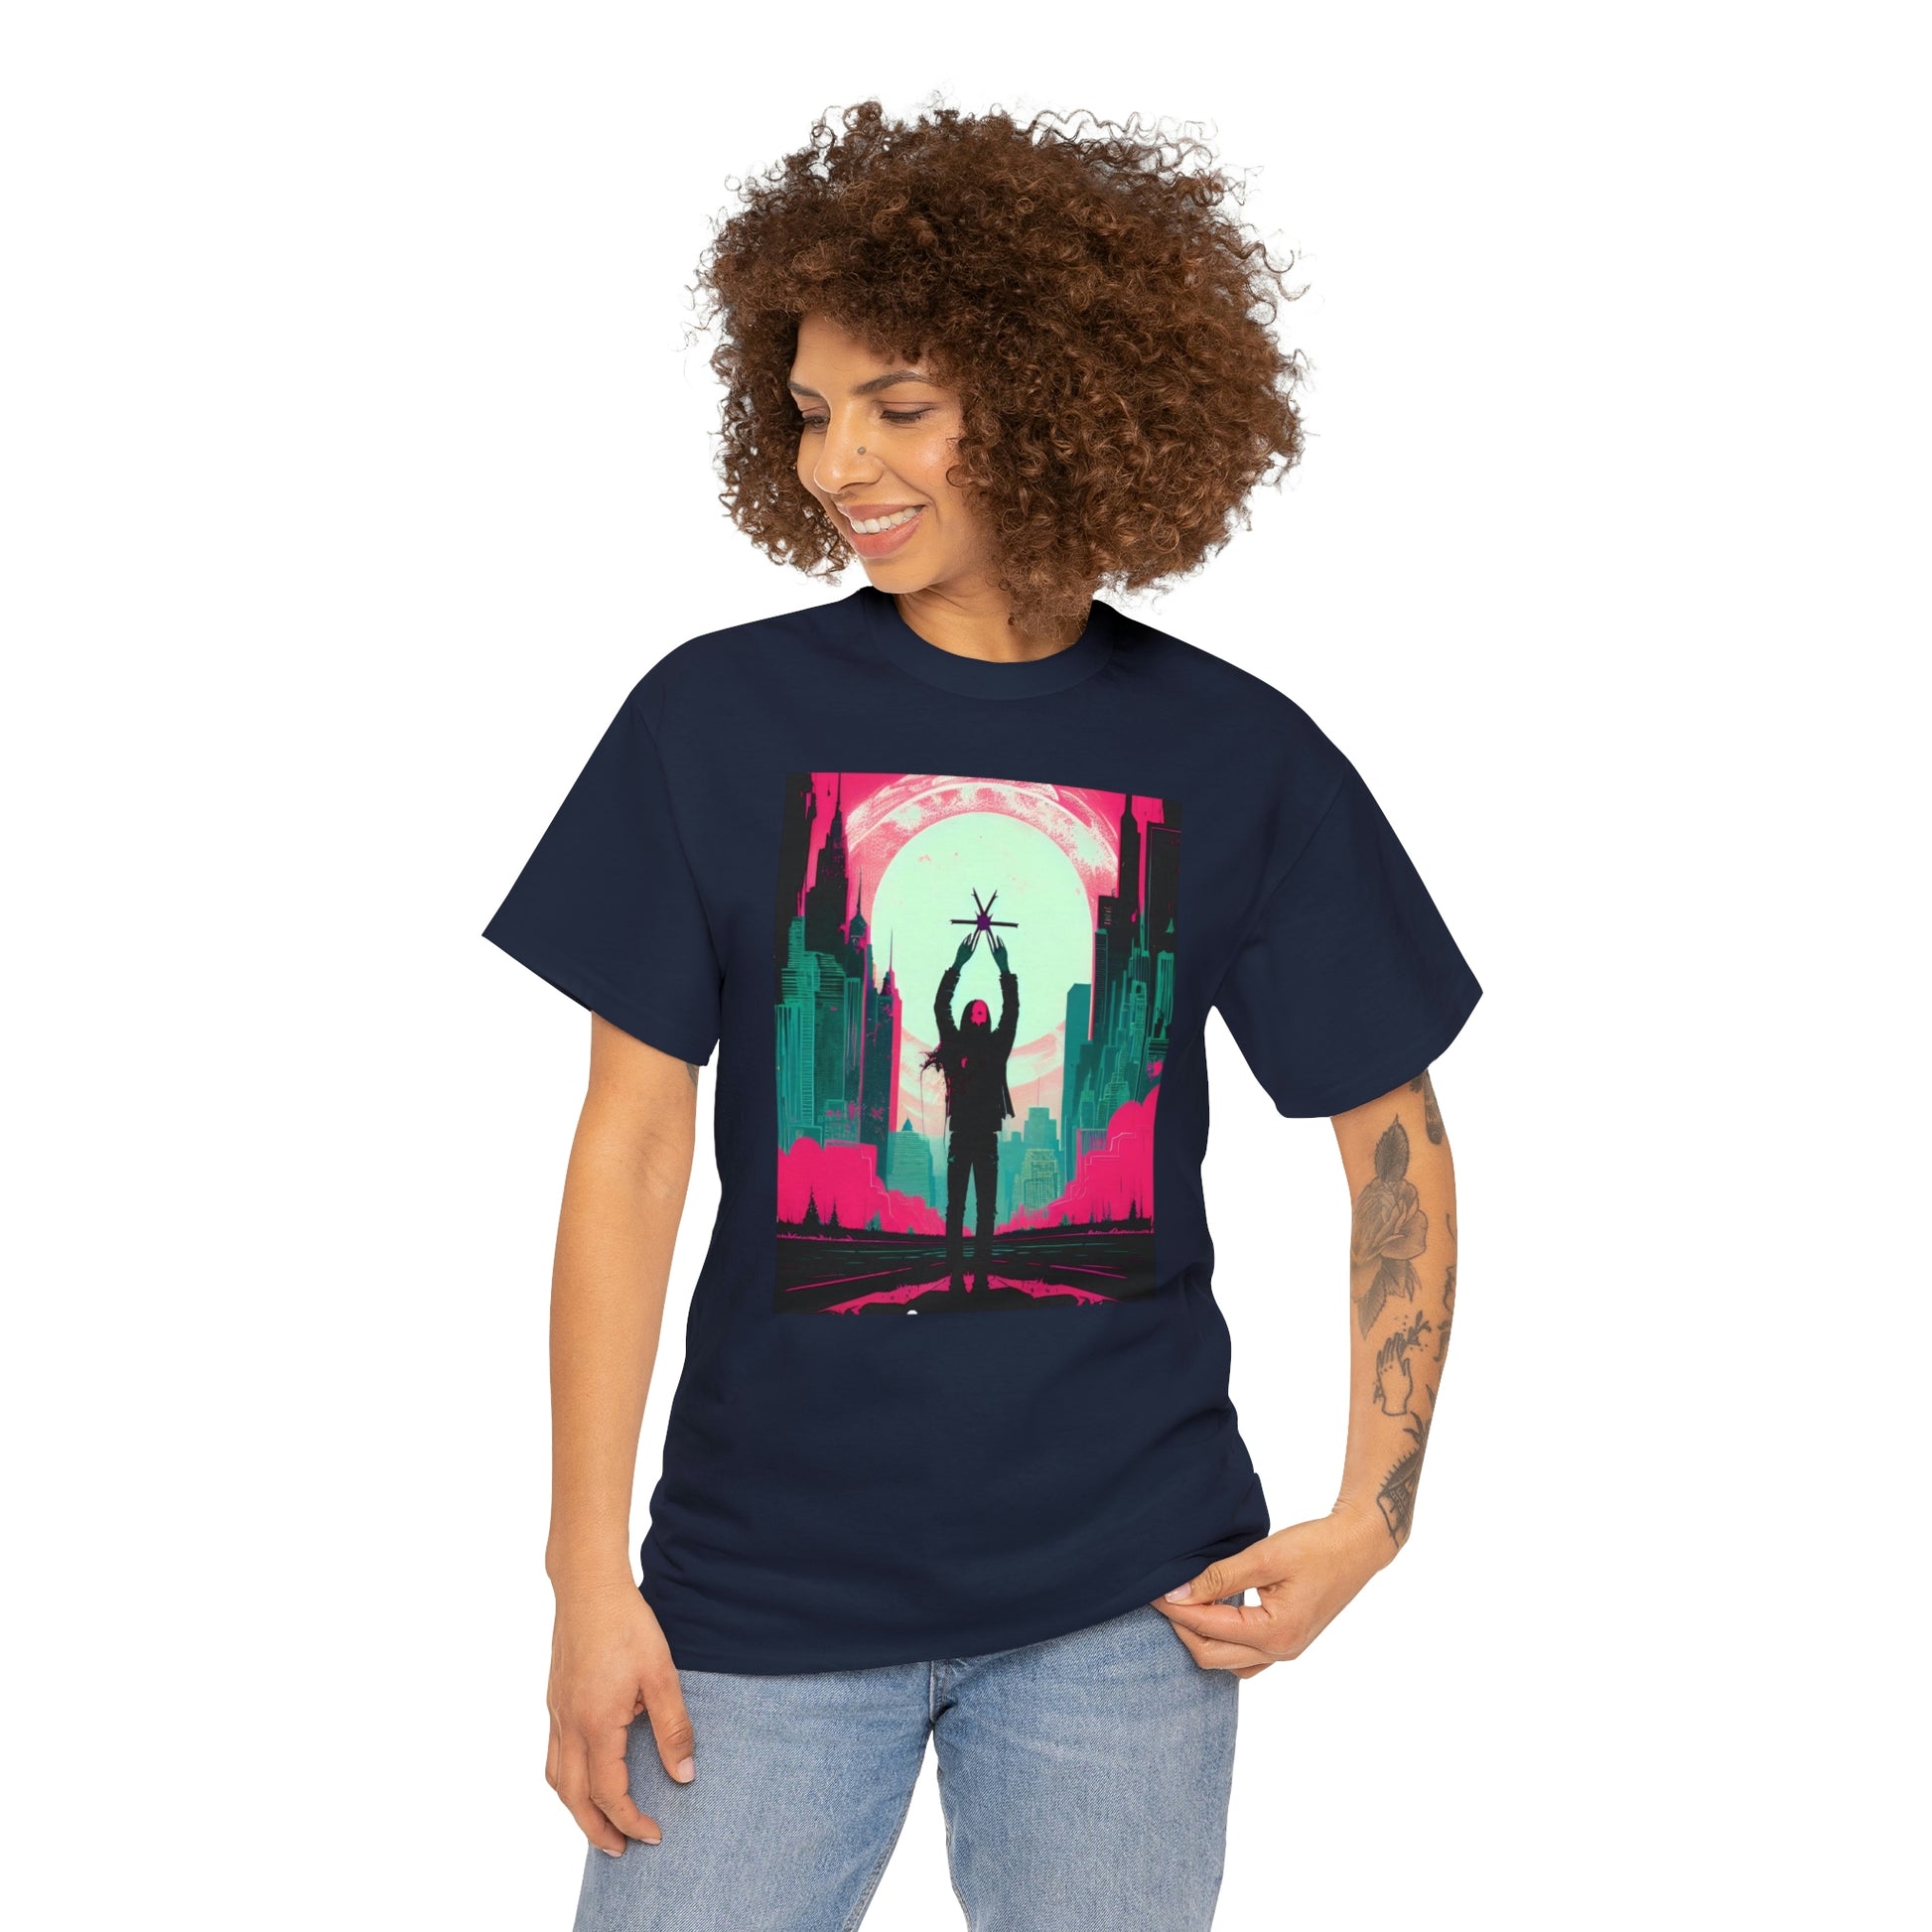 Woman wearing navy Last Hands Raised tee looking right with hand on left hip.